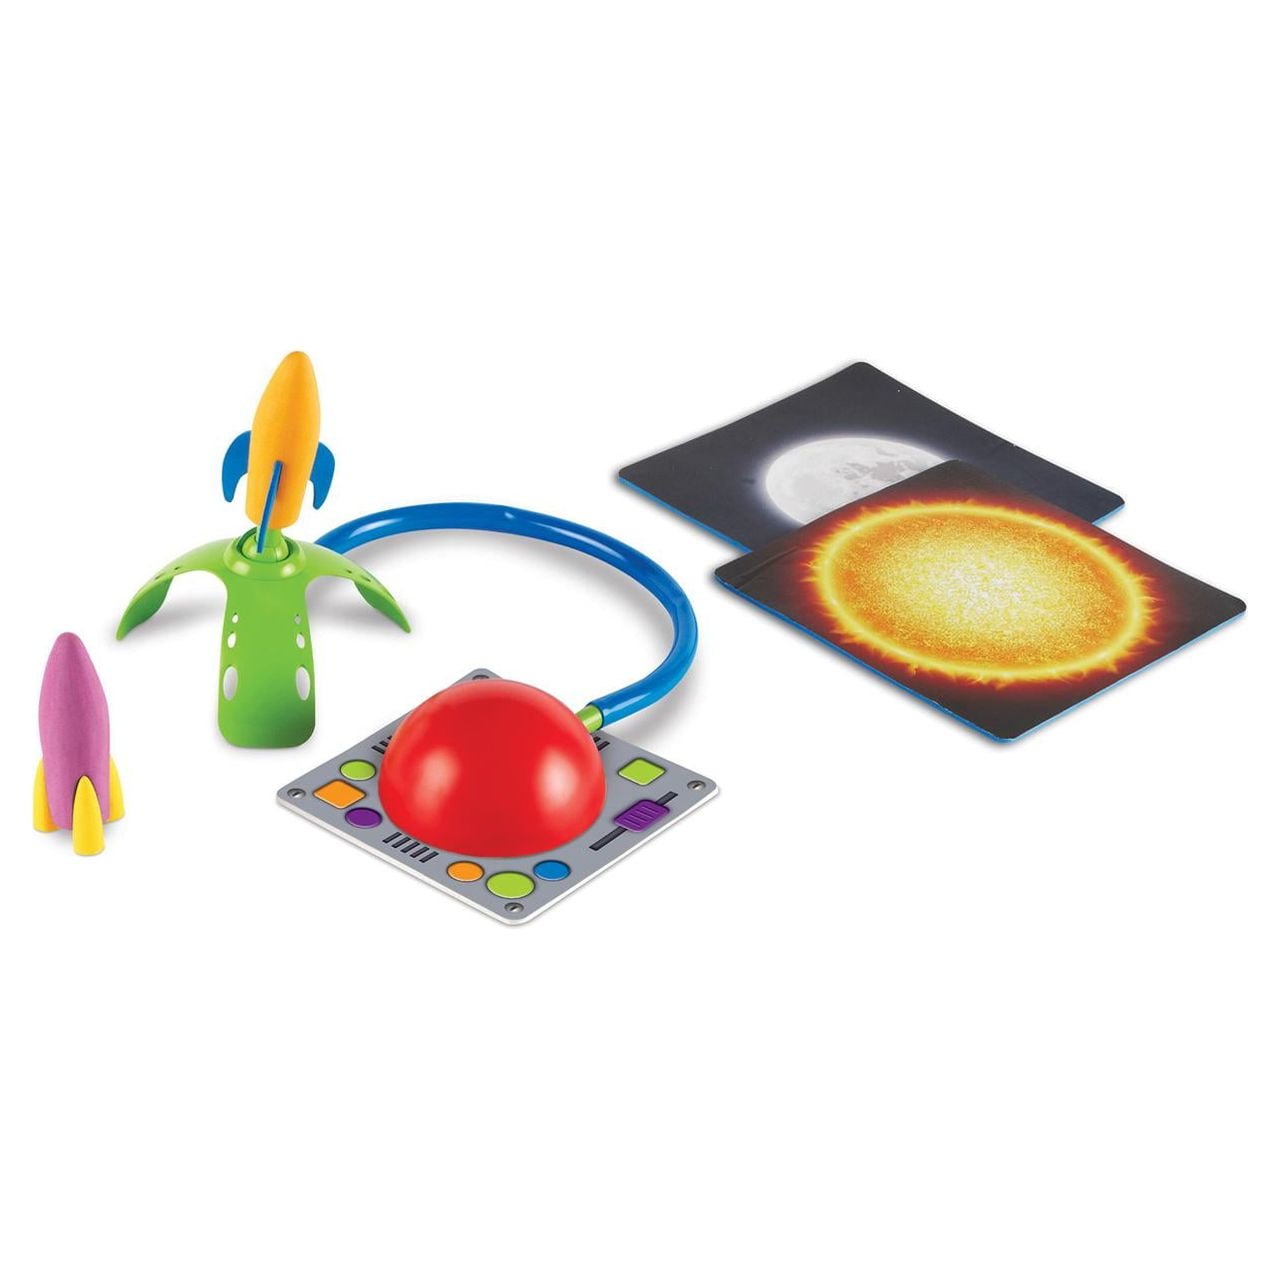 Curious Universe Kids: Discover Electricity - Book & Science Experiments Kit